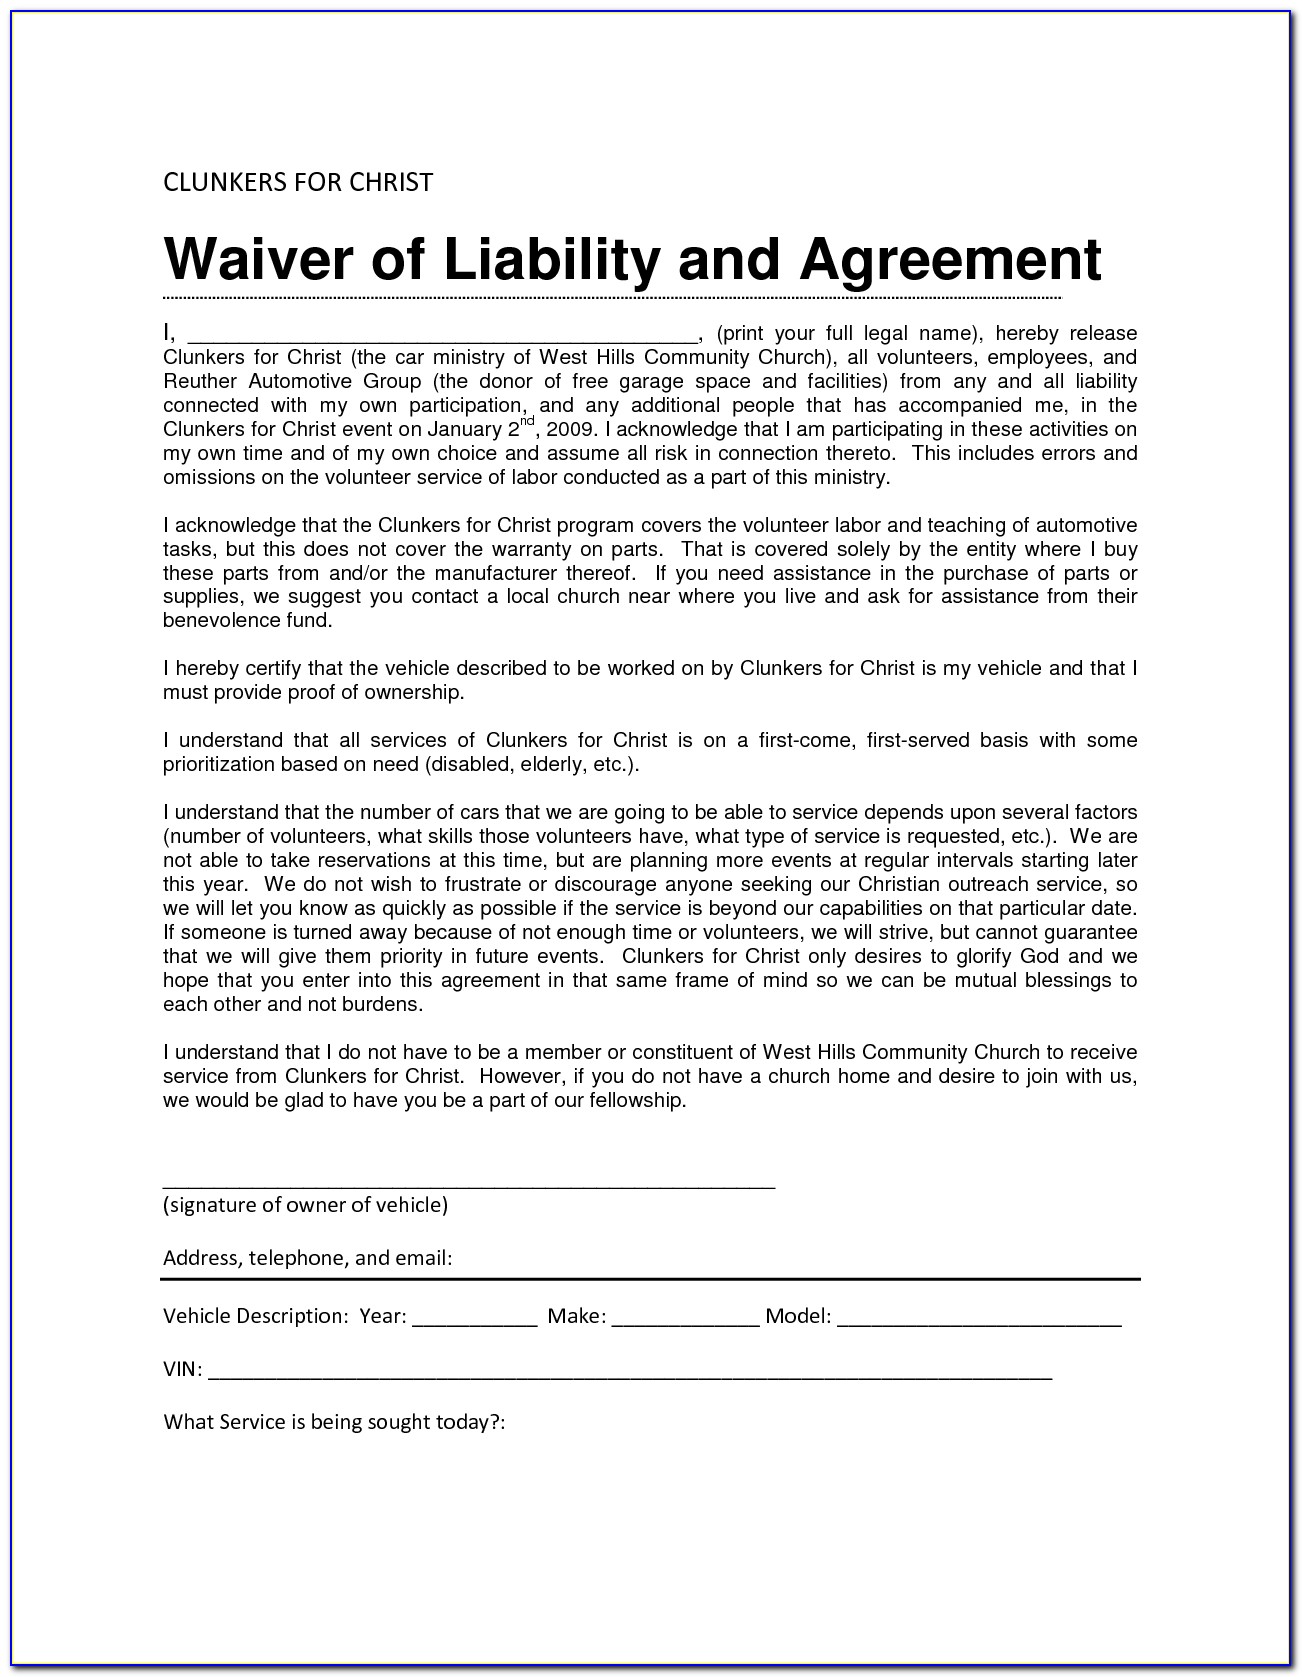 Employee Health Insurance Waiver Form Template